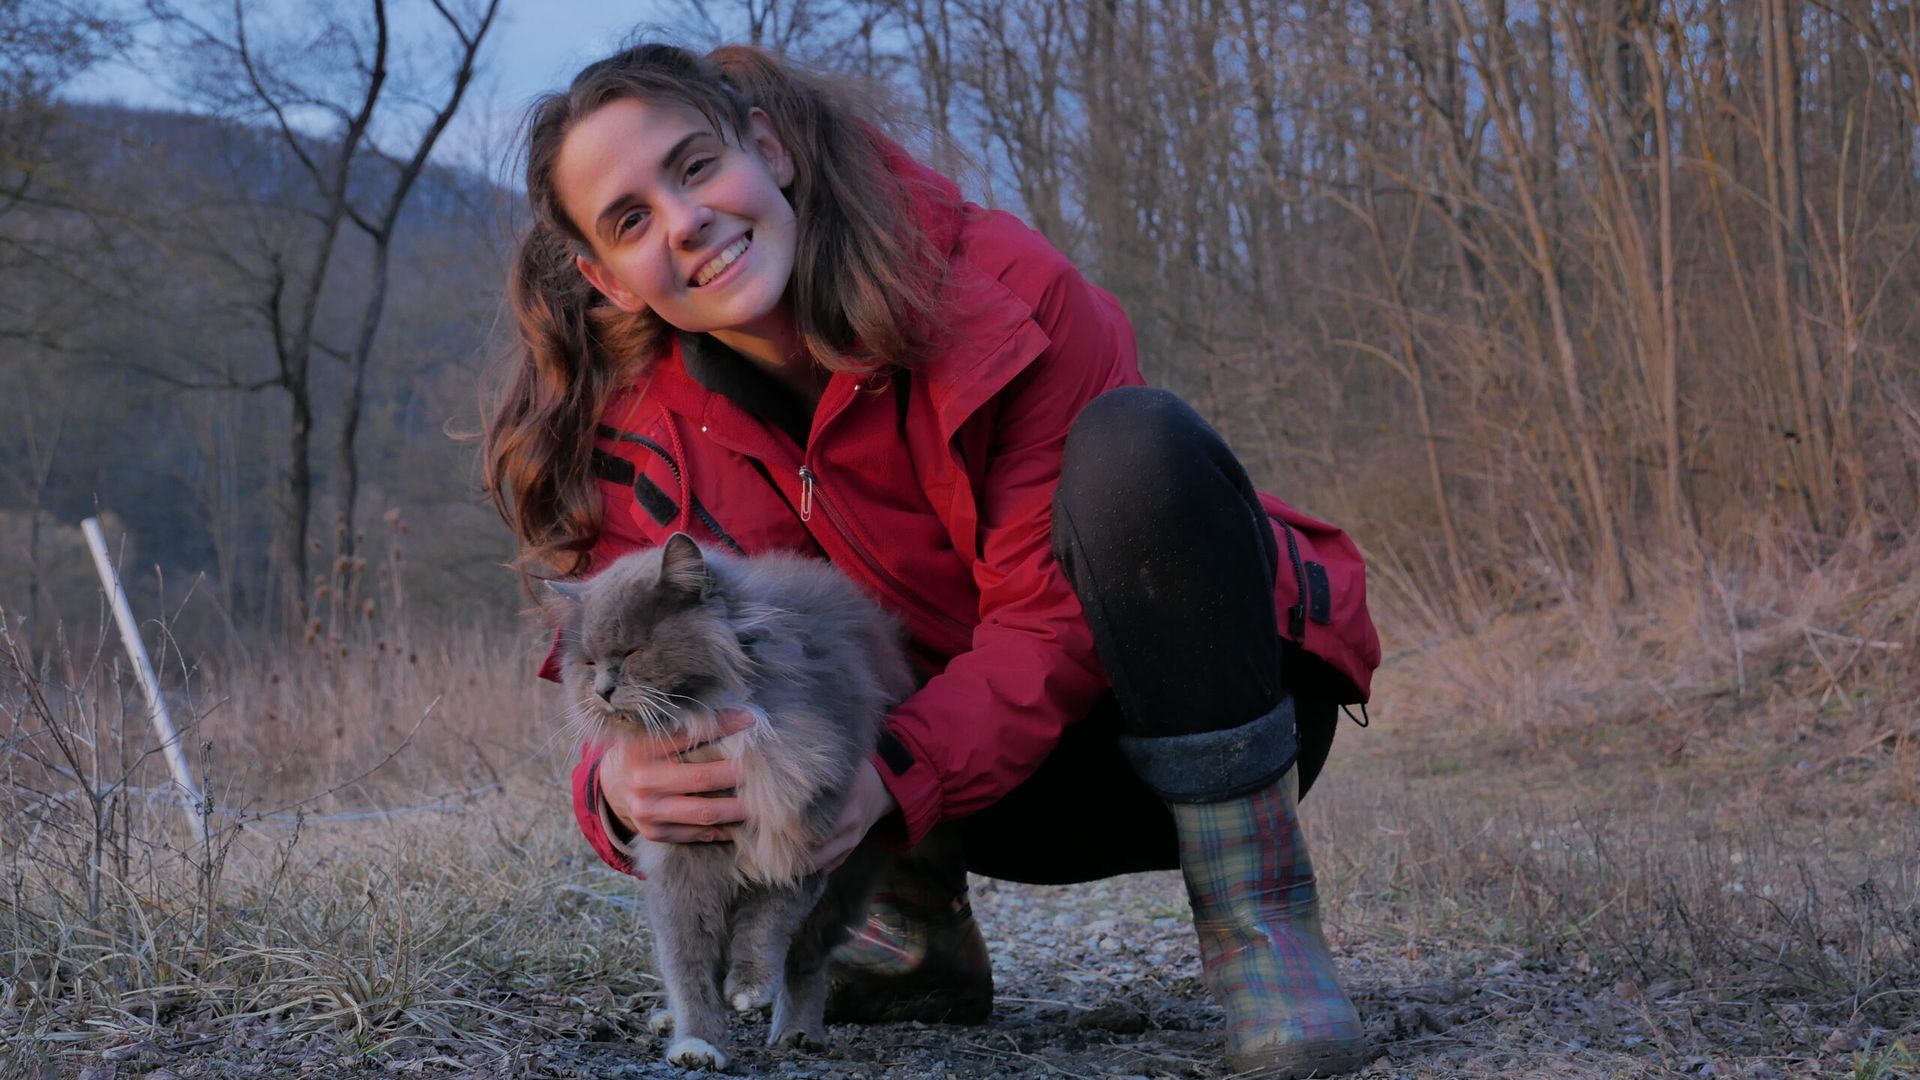 A girl posing with a cat.